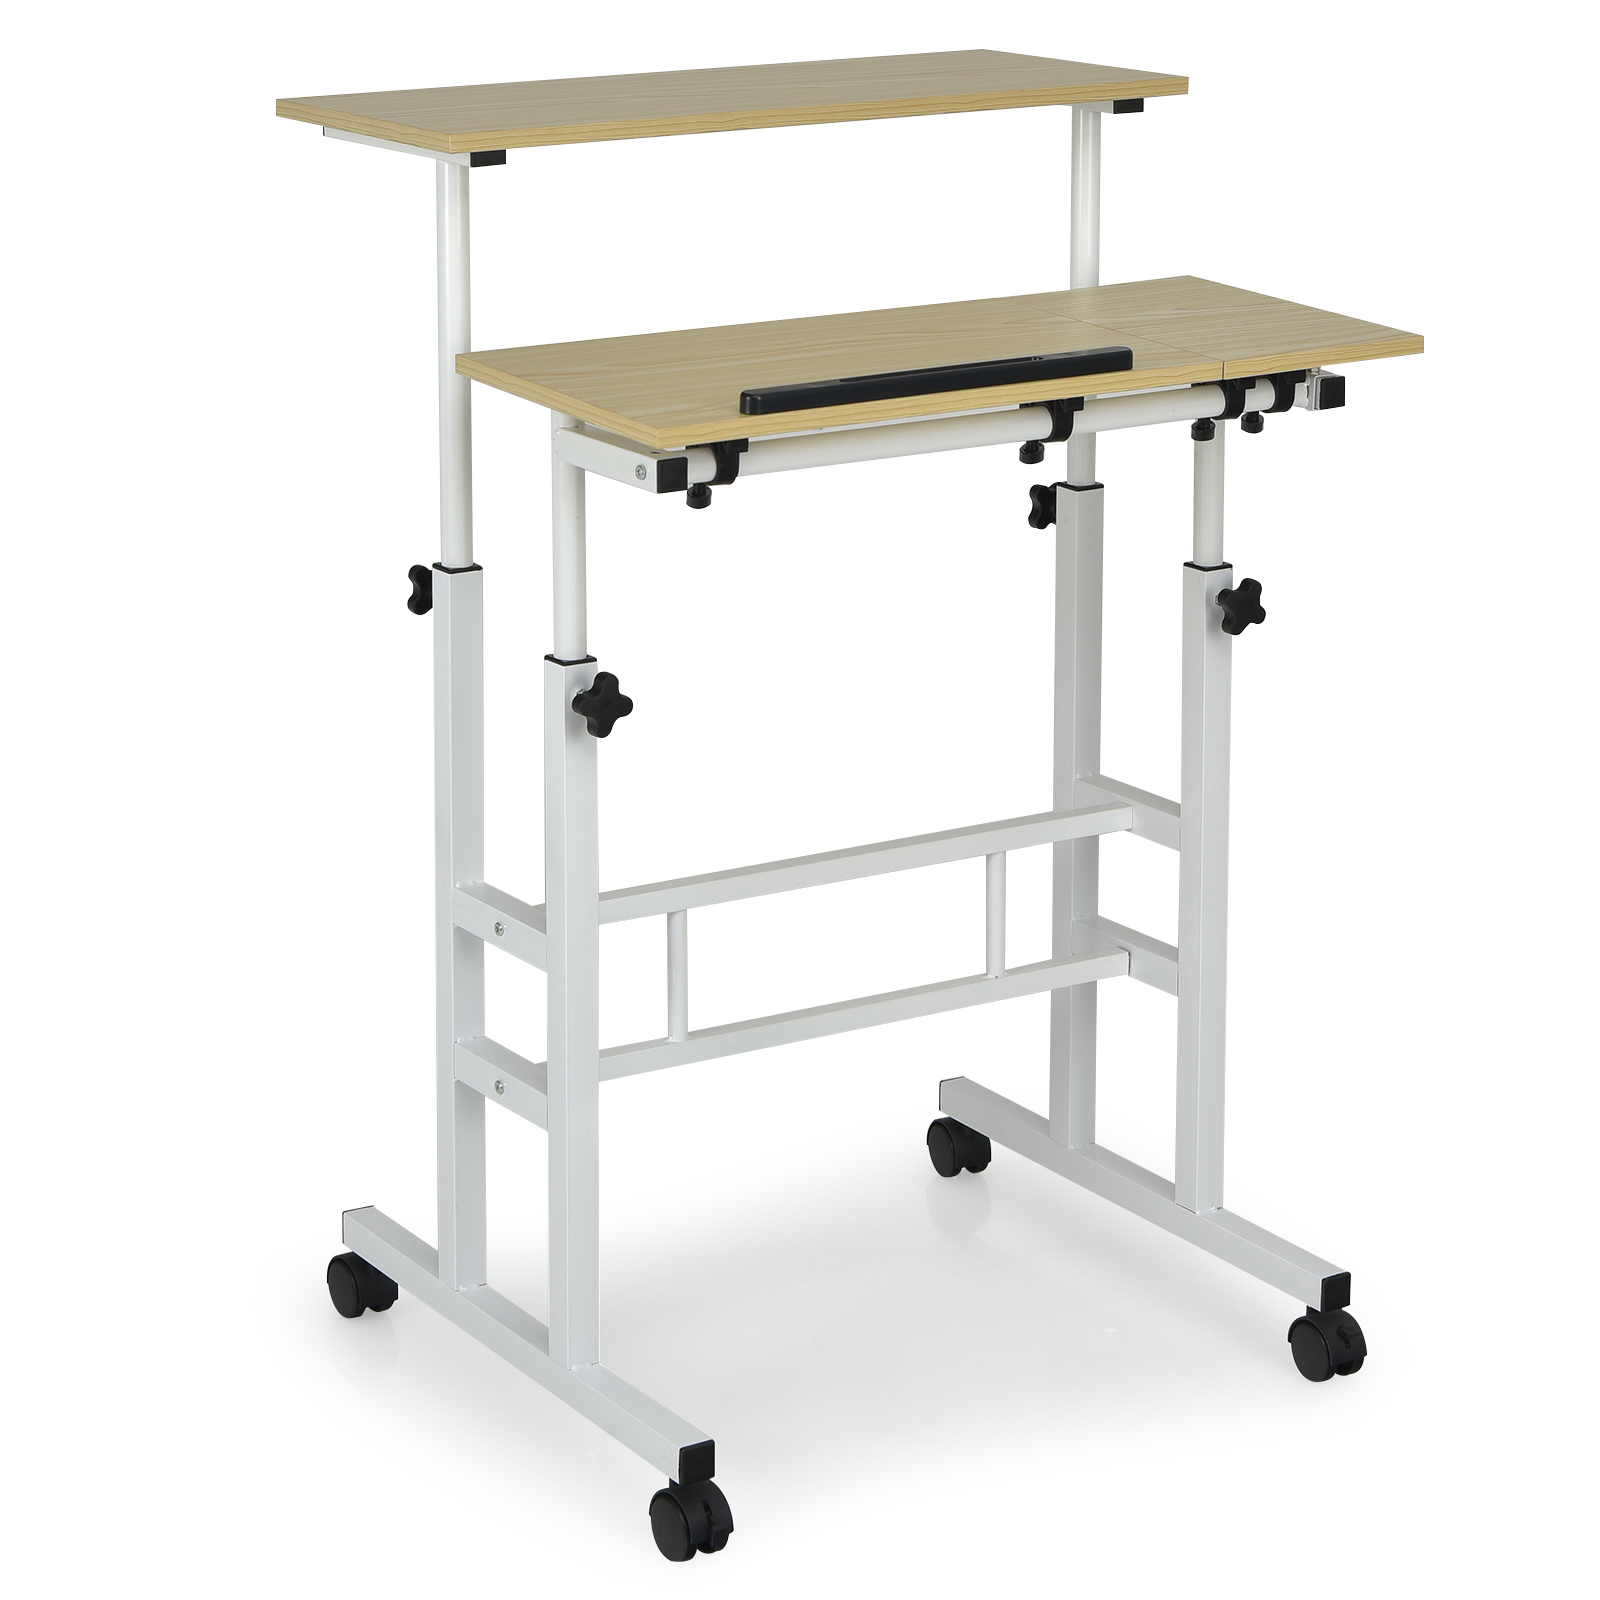 Height Adjustable Workstation with Wheels for Standing or Sitting-Natural